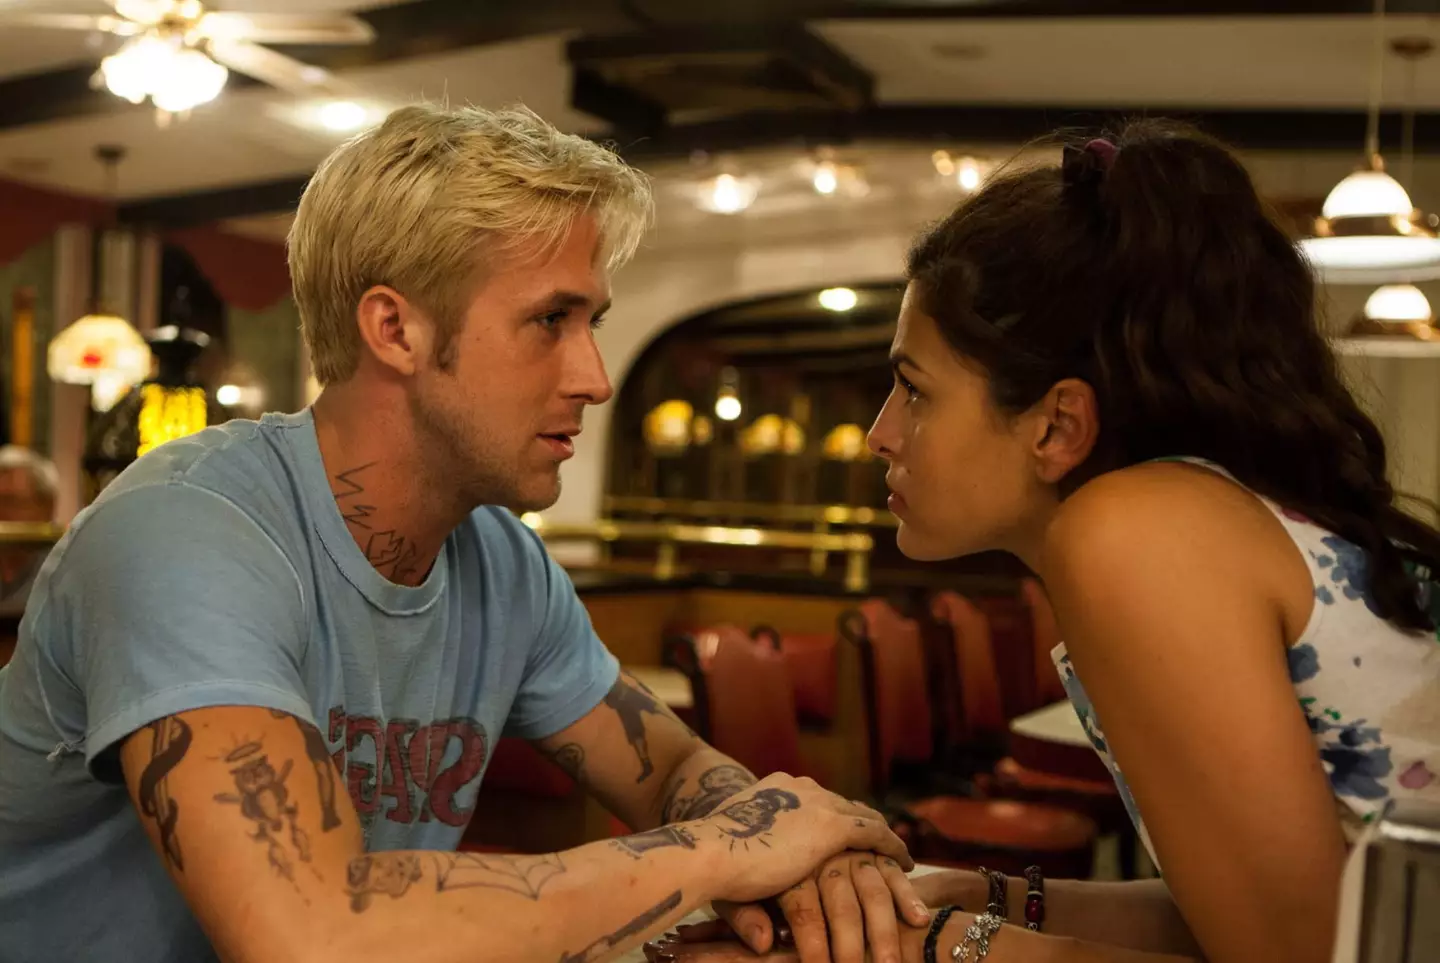 Gosling and Mendes worked together for The Place Beyond The Pines.